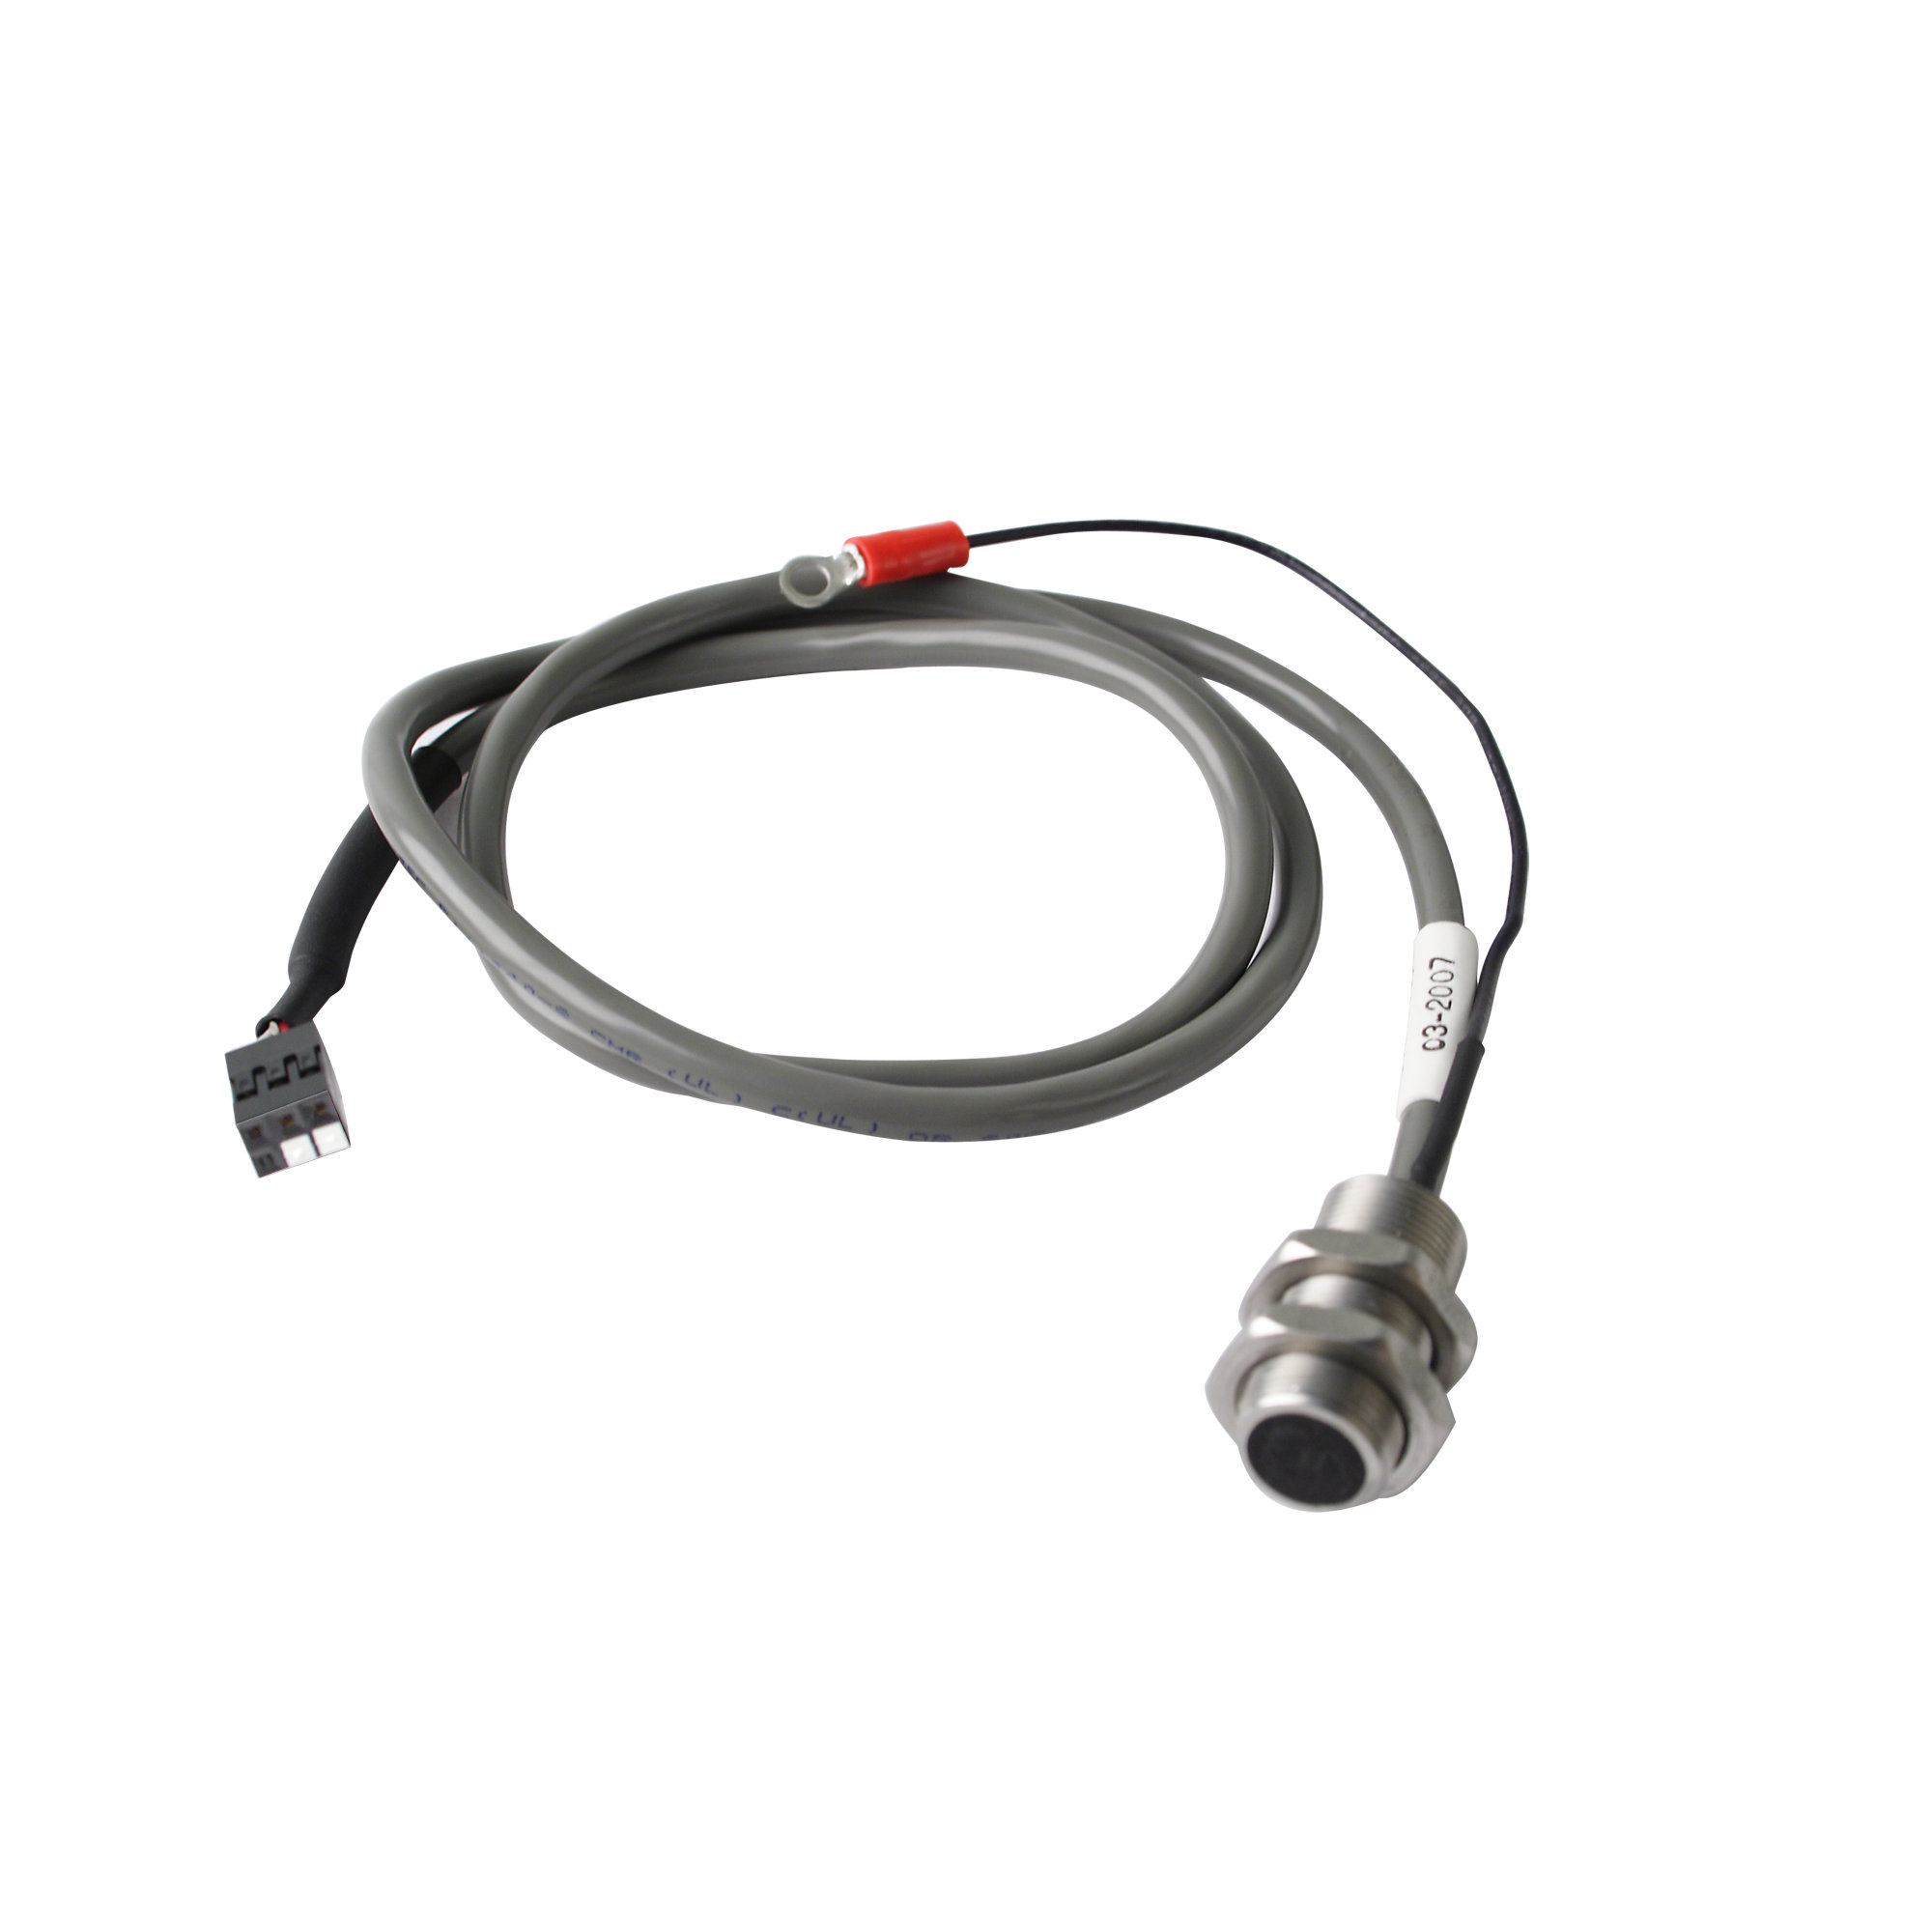 RPM Sensor with Ground Wire, AC Motor E Series and Pro Treads, Magnetic, Star Trac